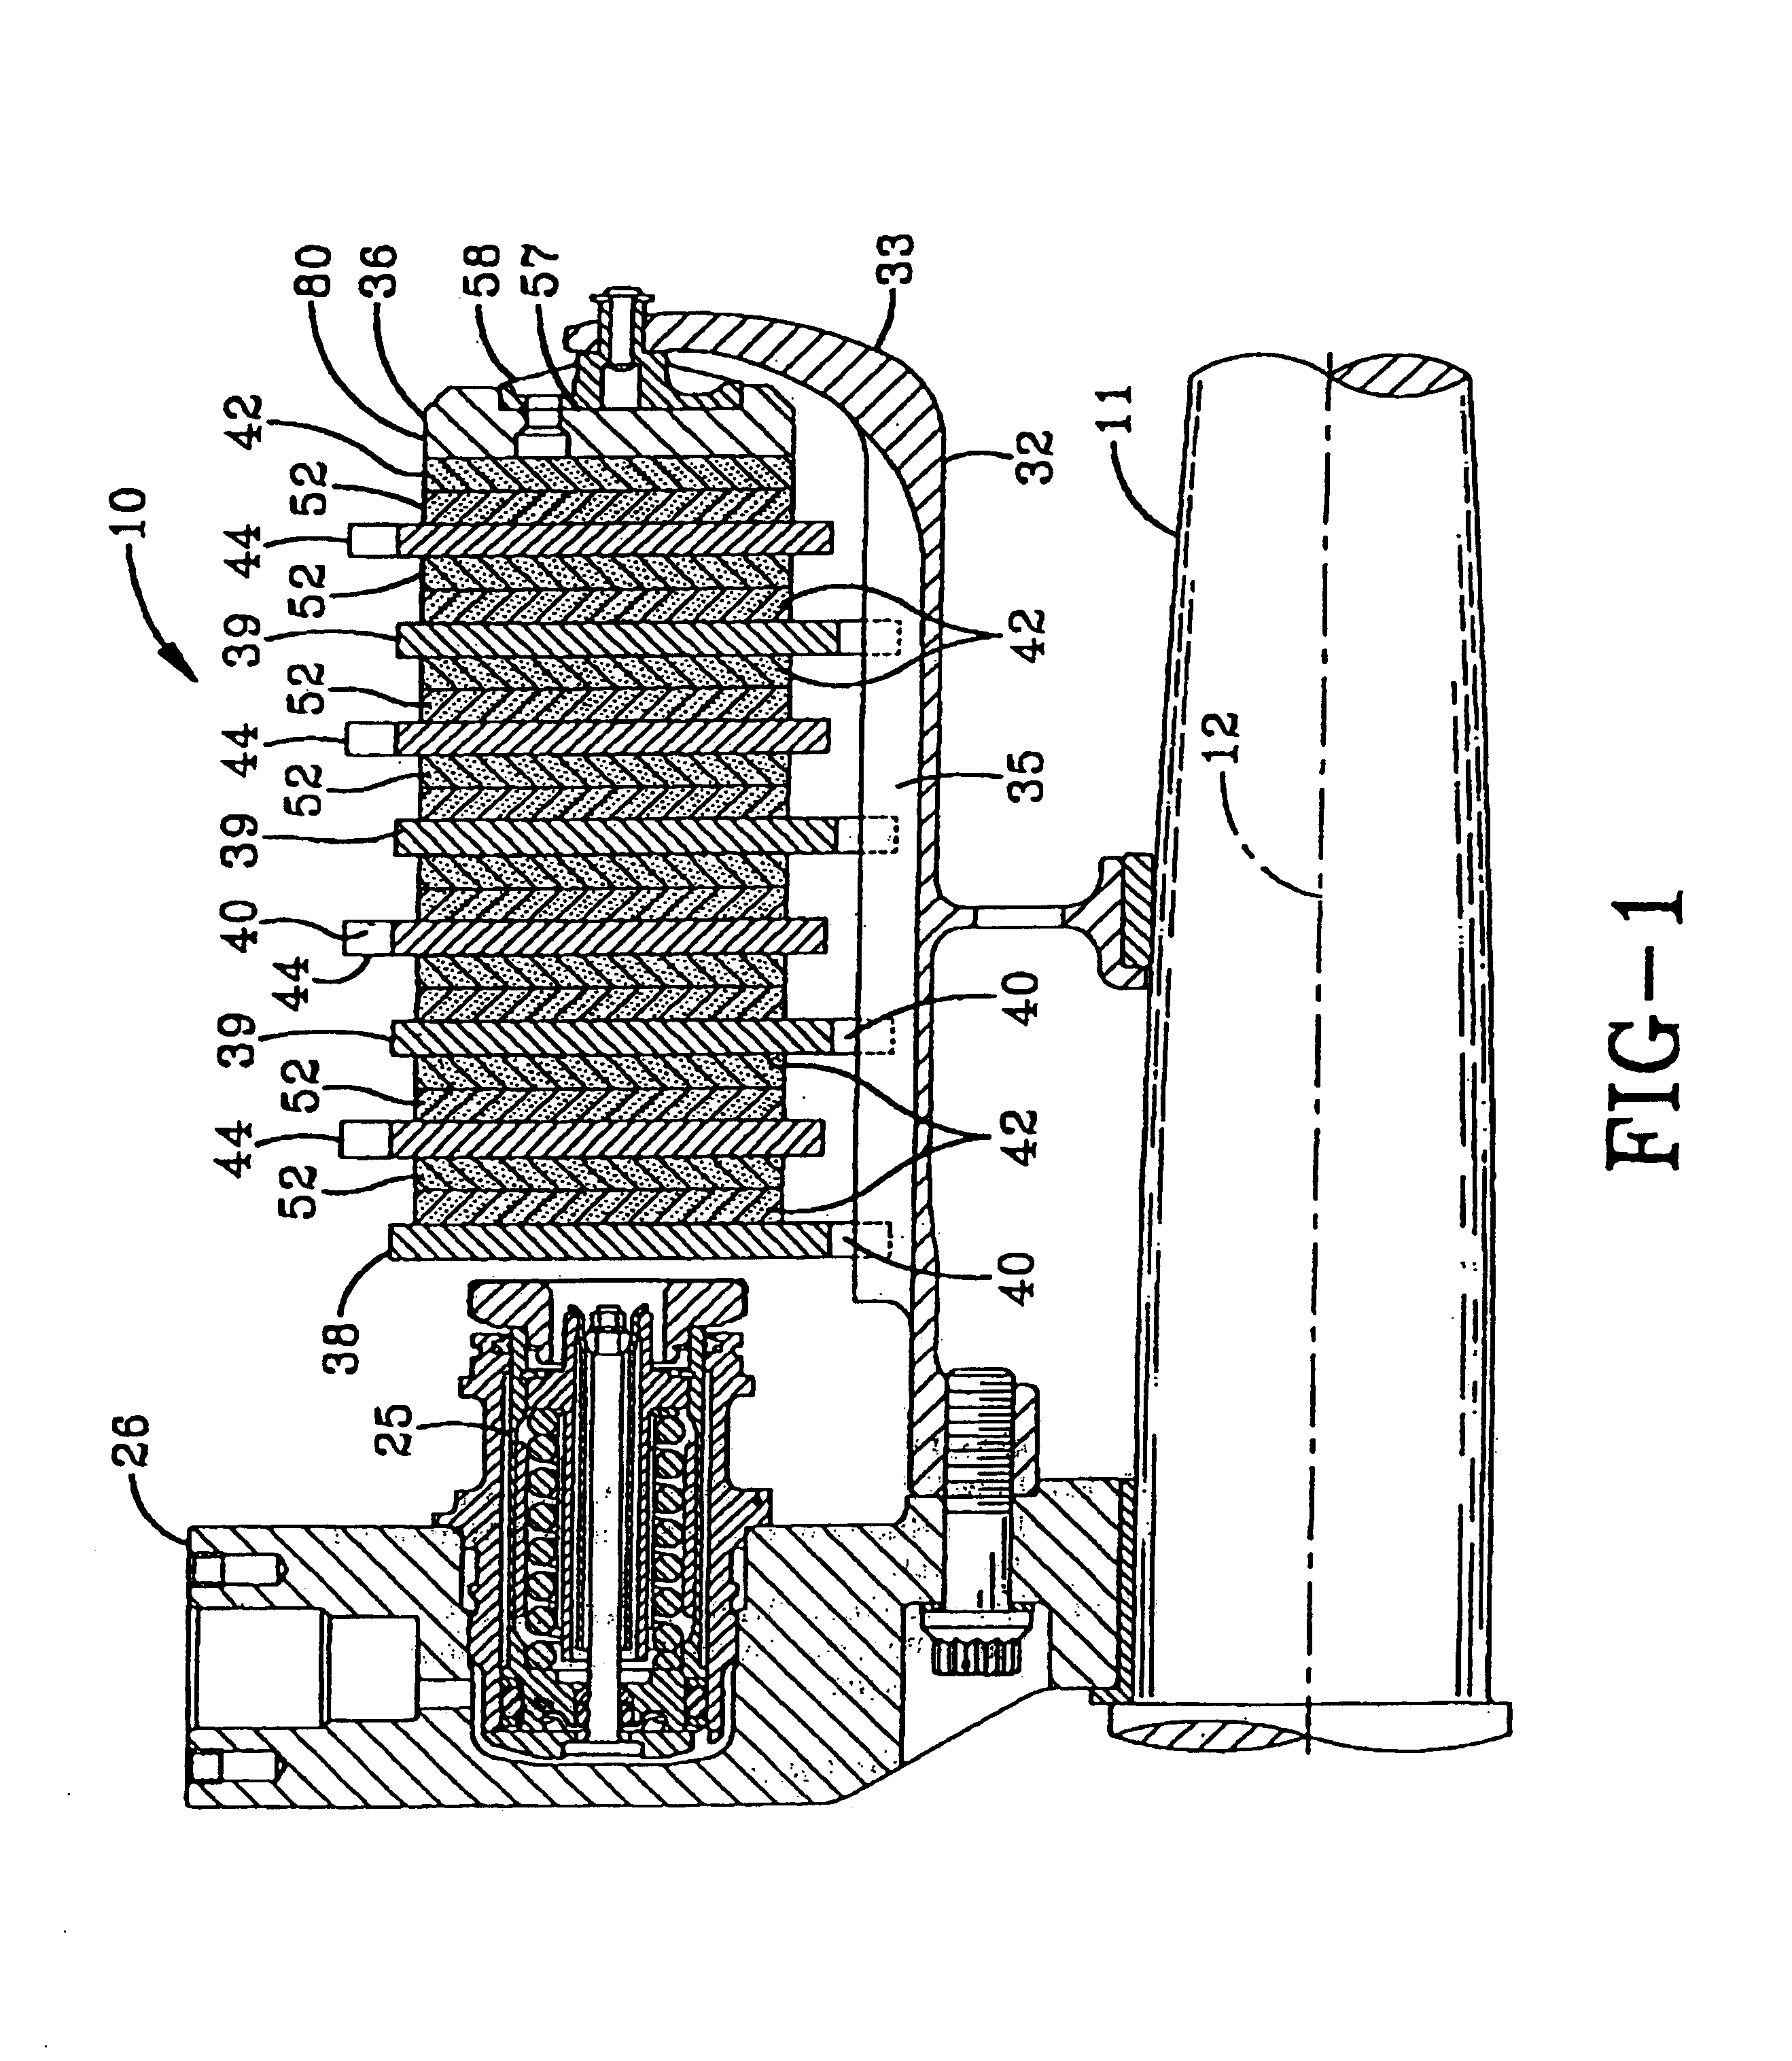 Three run disk brake stack and method of assembly